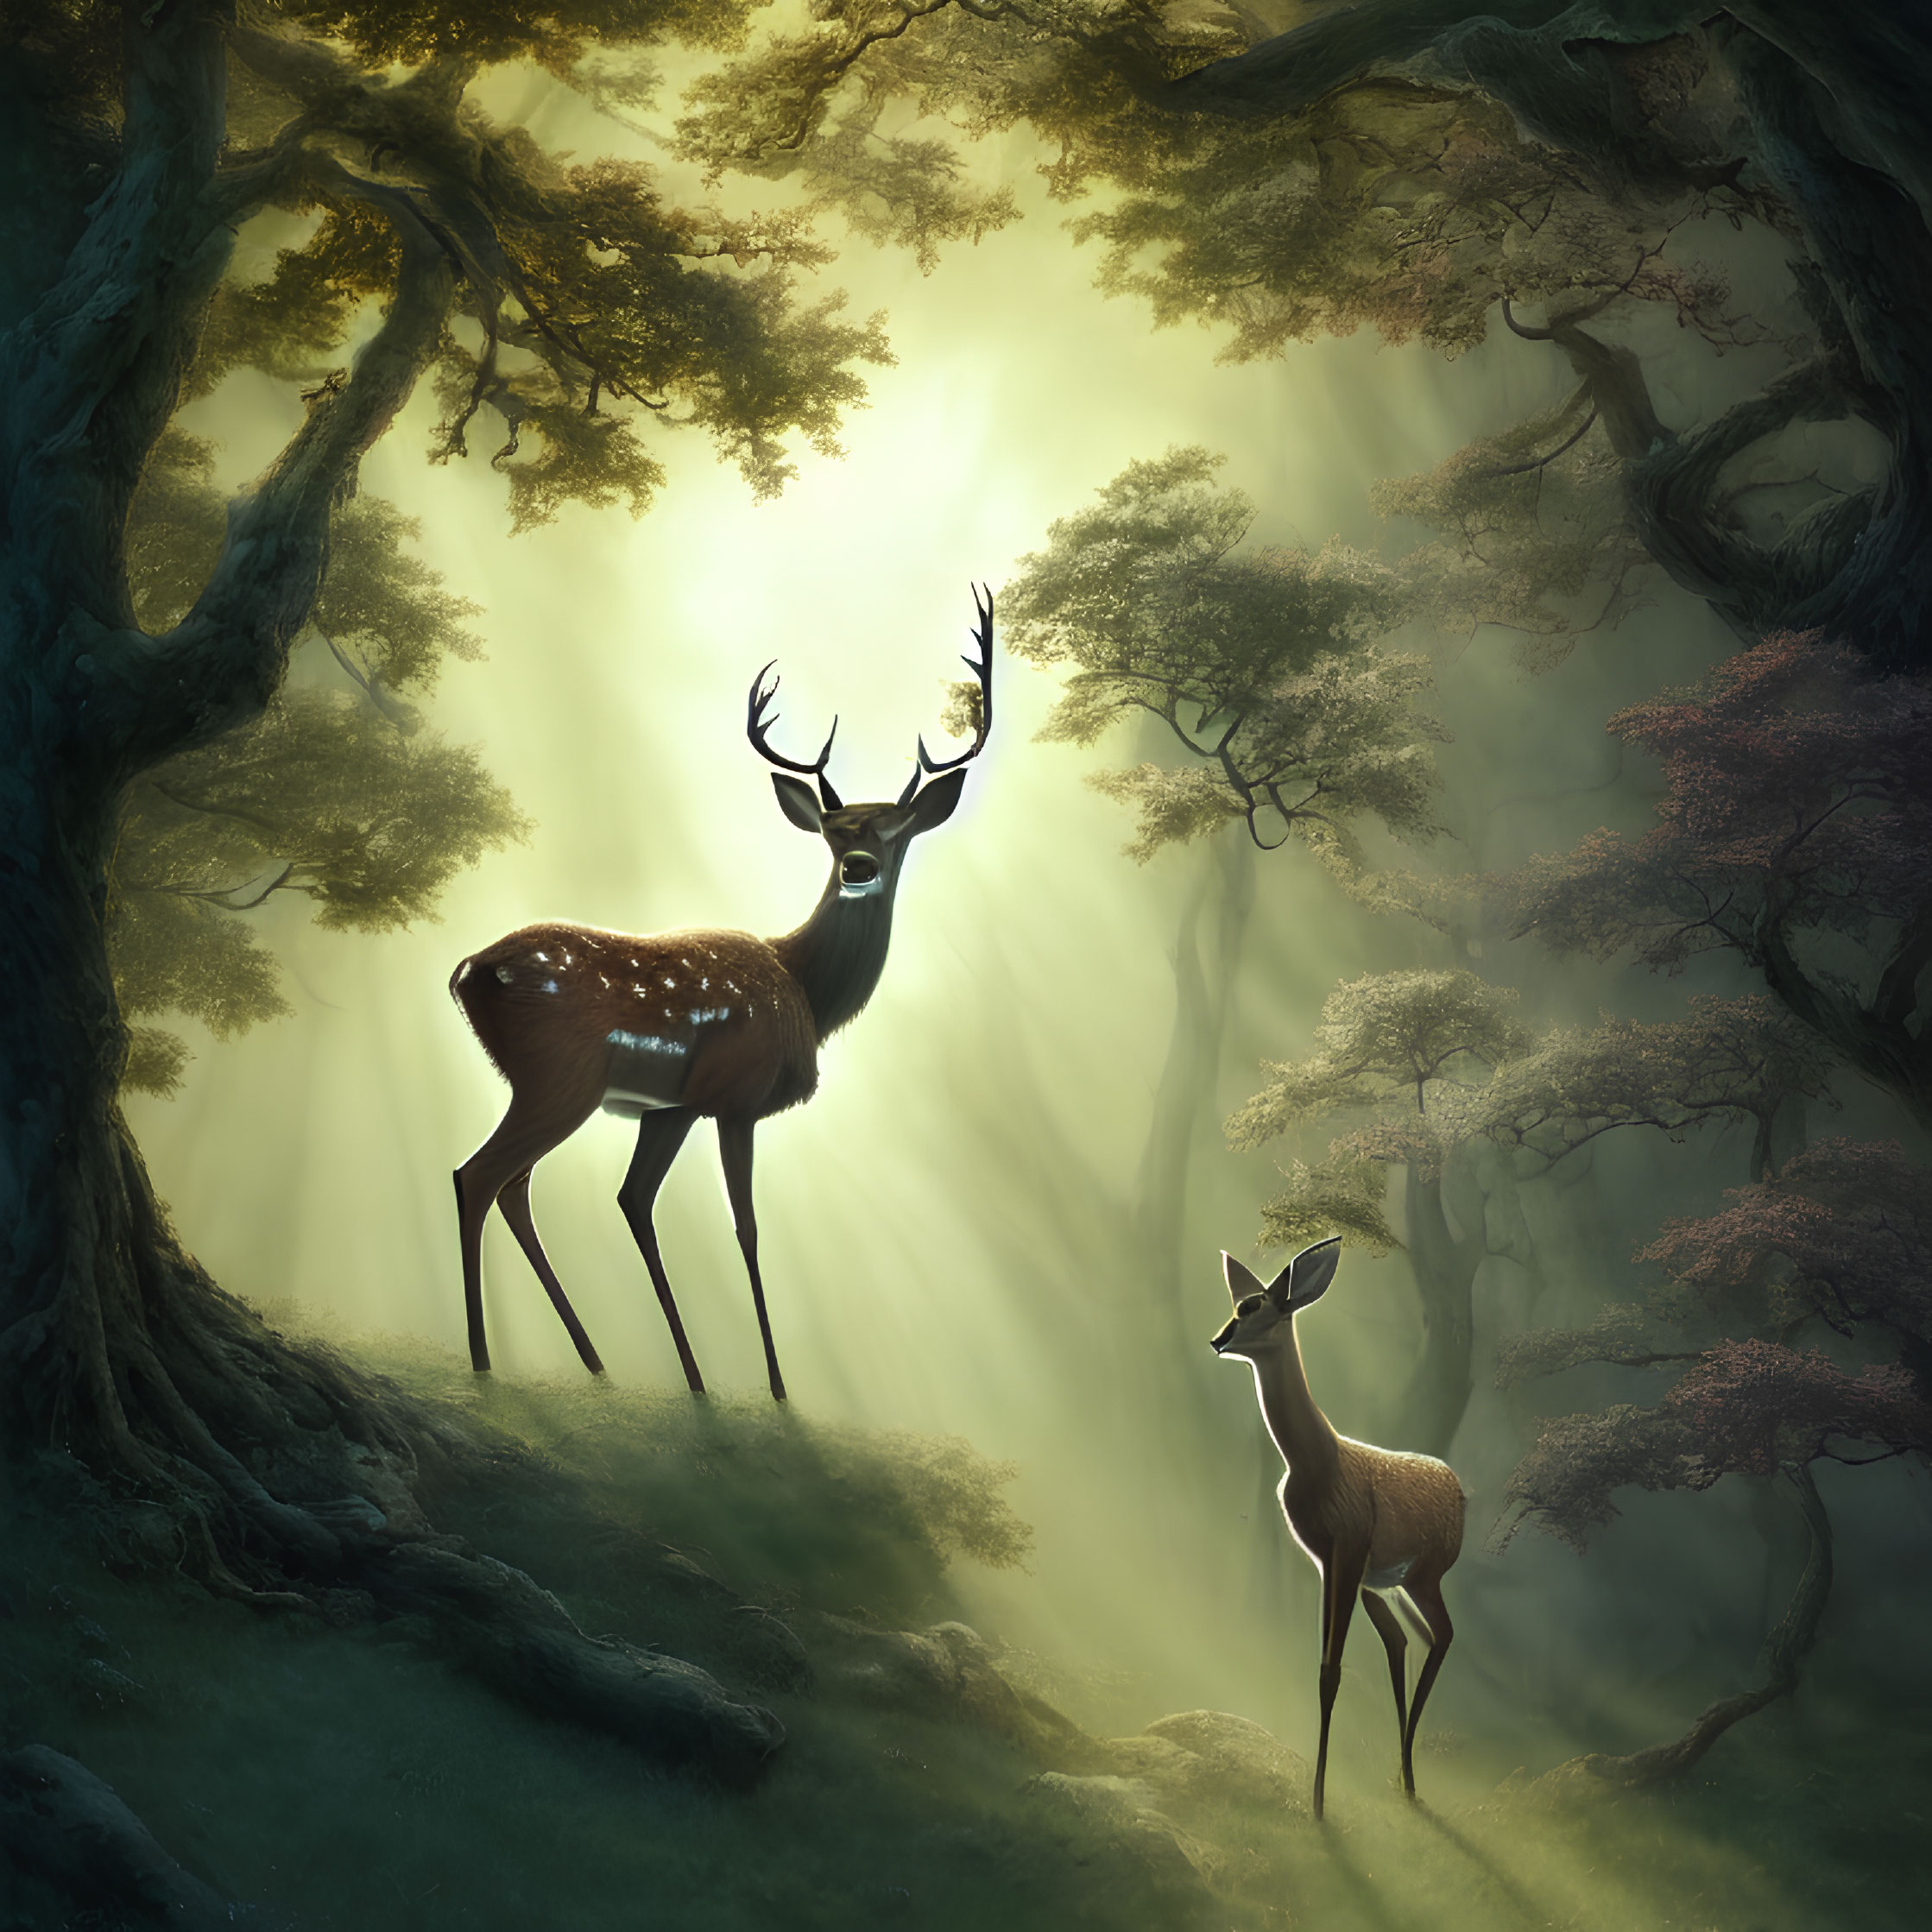 Majestic stag and doe in tranquil forest scene